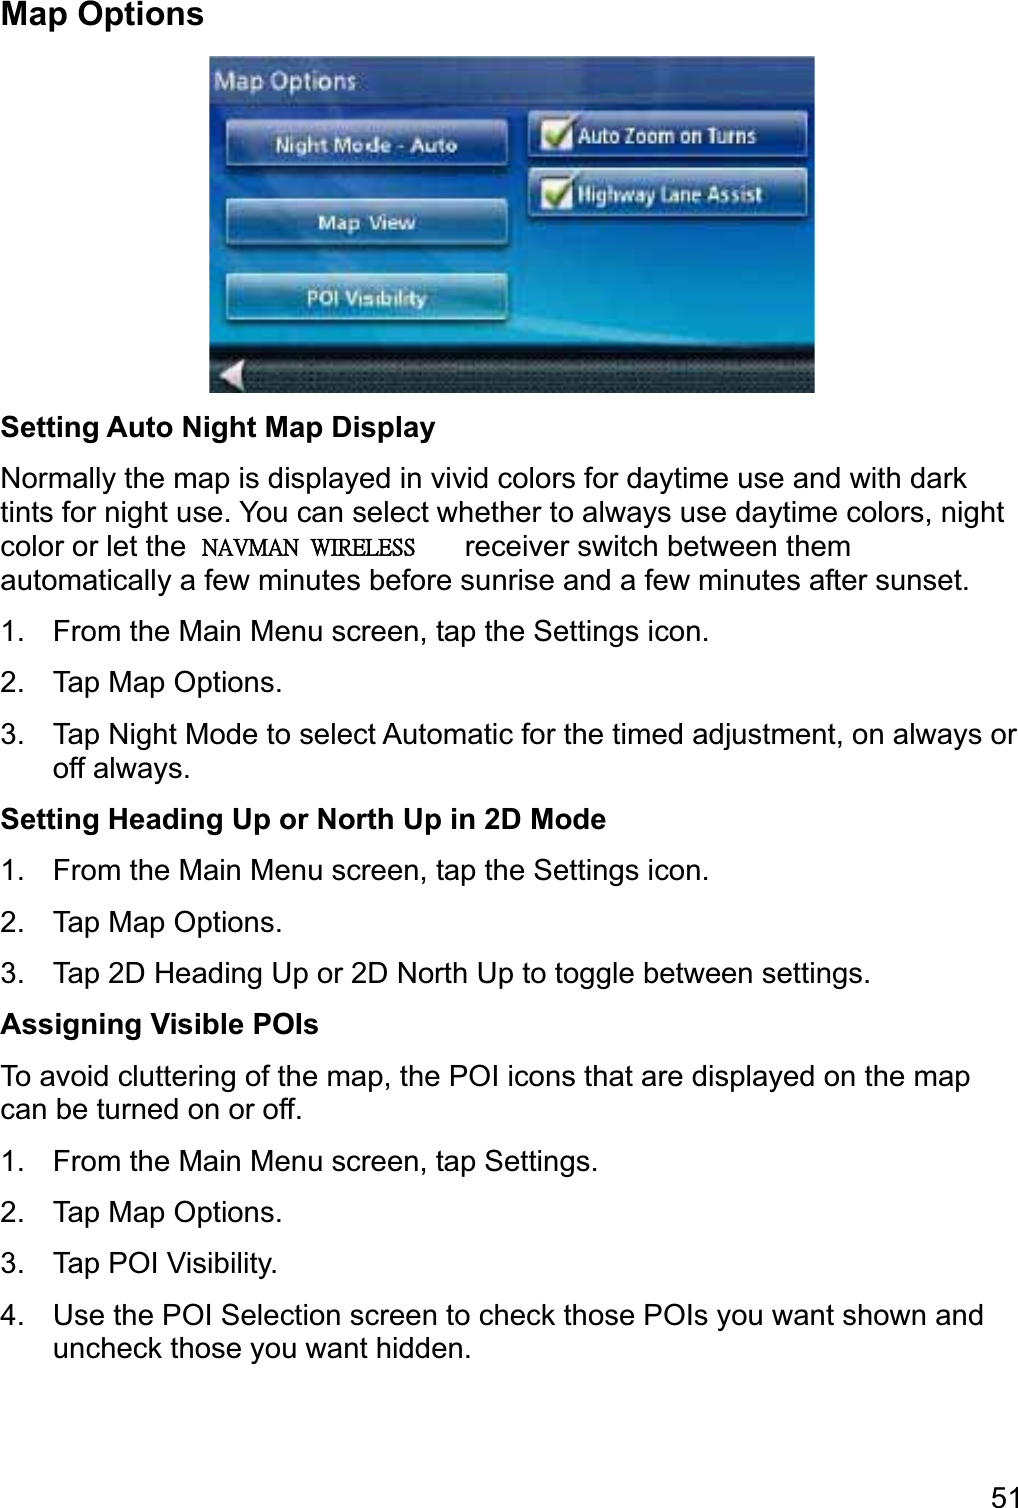 51Map Options Setting Auto Night Map Display Normally the map is displayed in vivid colors for daytime use and with dark tints for night use. You can select whether to always use daytime colors, night color or let the Magellan RoadMate receiver switch between them automatically a few minutes before sunrise and a few minutes after sunset. 1.  From the Main Menu screen, tap the Settings icon. 2.  Tap Map Options. 3.  Tap Night Mode to select Automatic for the timed adjustment, on always or off always. Setting Heading Up or North Up in 2D Mode 1.  From the Main Menu screen, tap the Settings icon. 2.  Tap Map Options. 3.  Tap 2D Heading Up or 2D North Up to toggle between settings. Assigning Visible POIs To avoid cluttering of the map, the POI icons that are displayed on the map can be turned on or off. 1.  From the Main Menu screen, tap Settings. 2.  Tap Map Options. 3.  Tap POI Visibility. 4.  Use the POI Selection screen to check those POIs you want shown and uncheck those you want hidden. ˡ˔˩ˠ˔ˡʳʳ˪˜˥˘˟˘˦˦